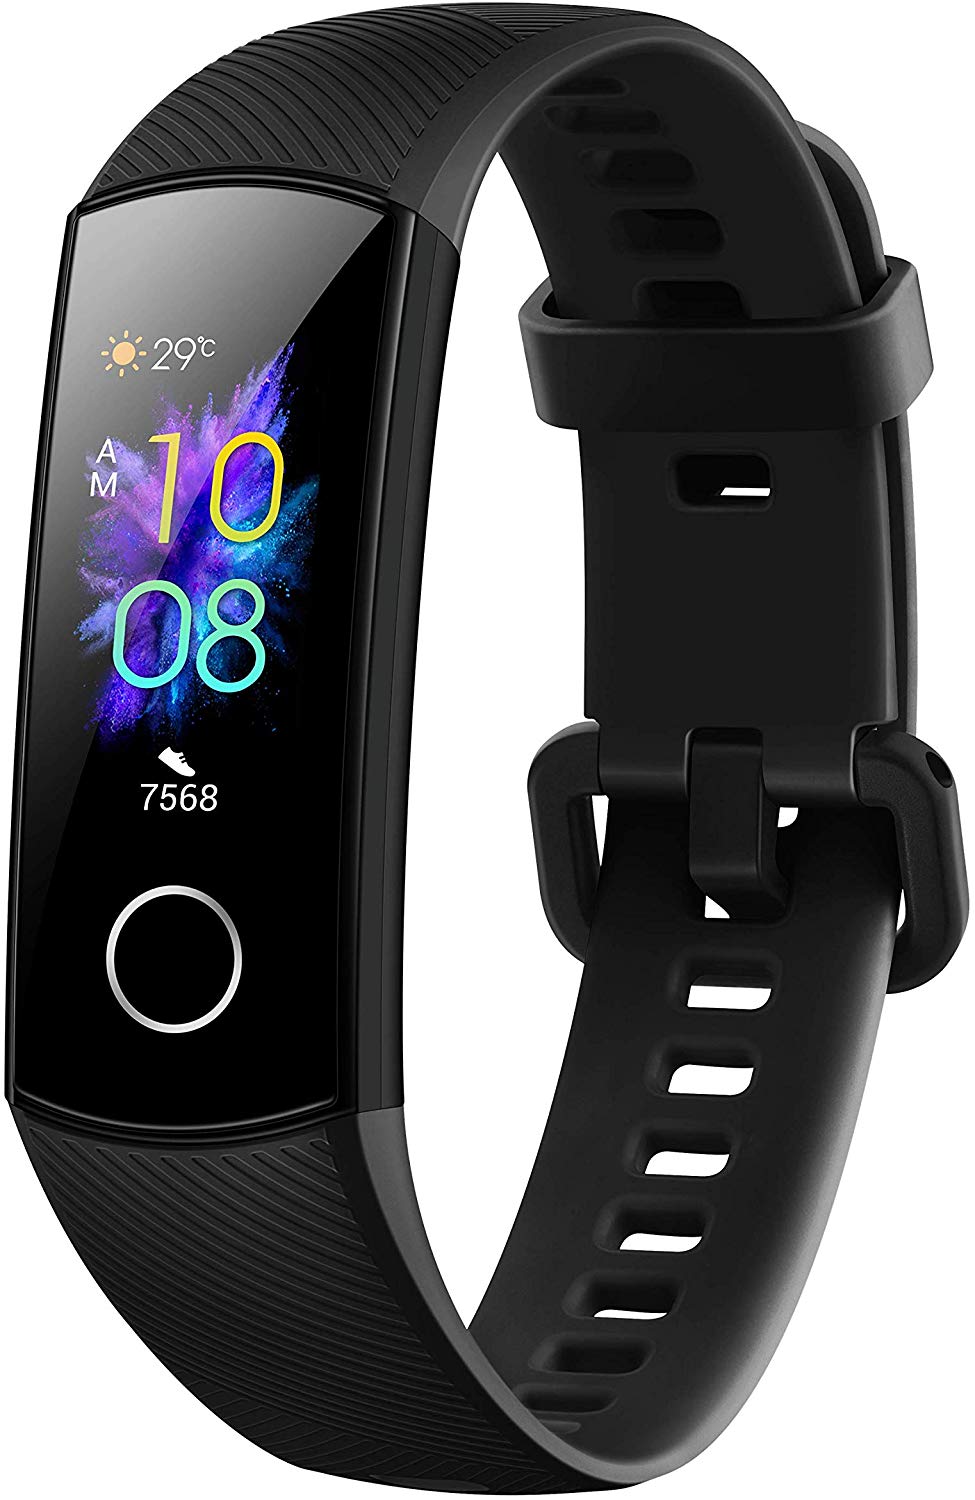 Honor Band 5 Sport review: Niche excellence - Tech Advisor